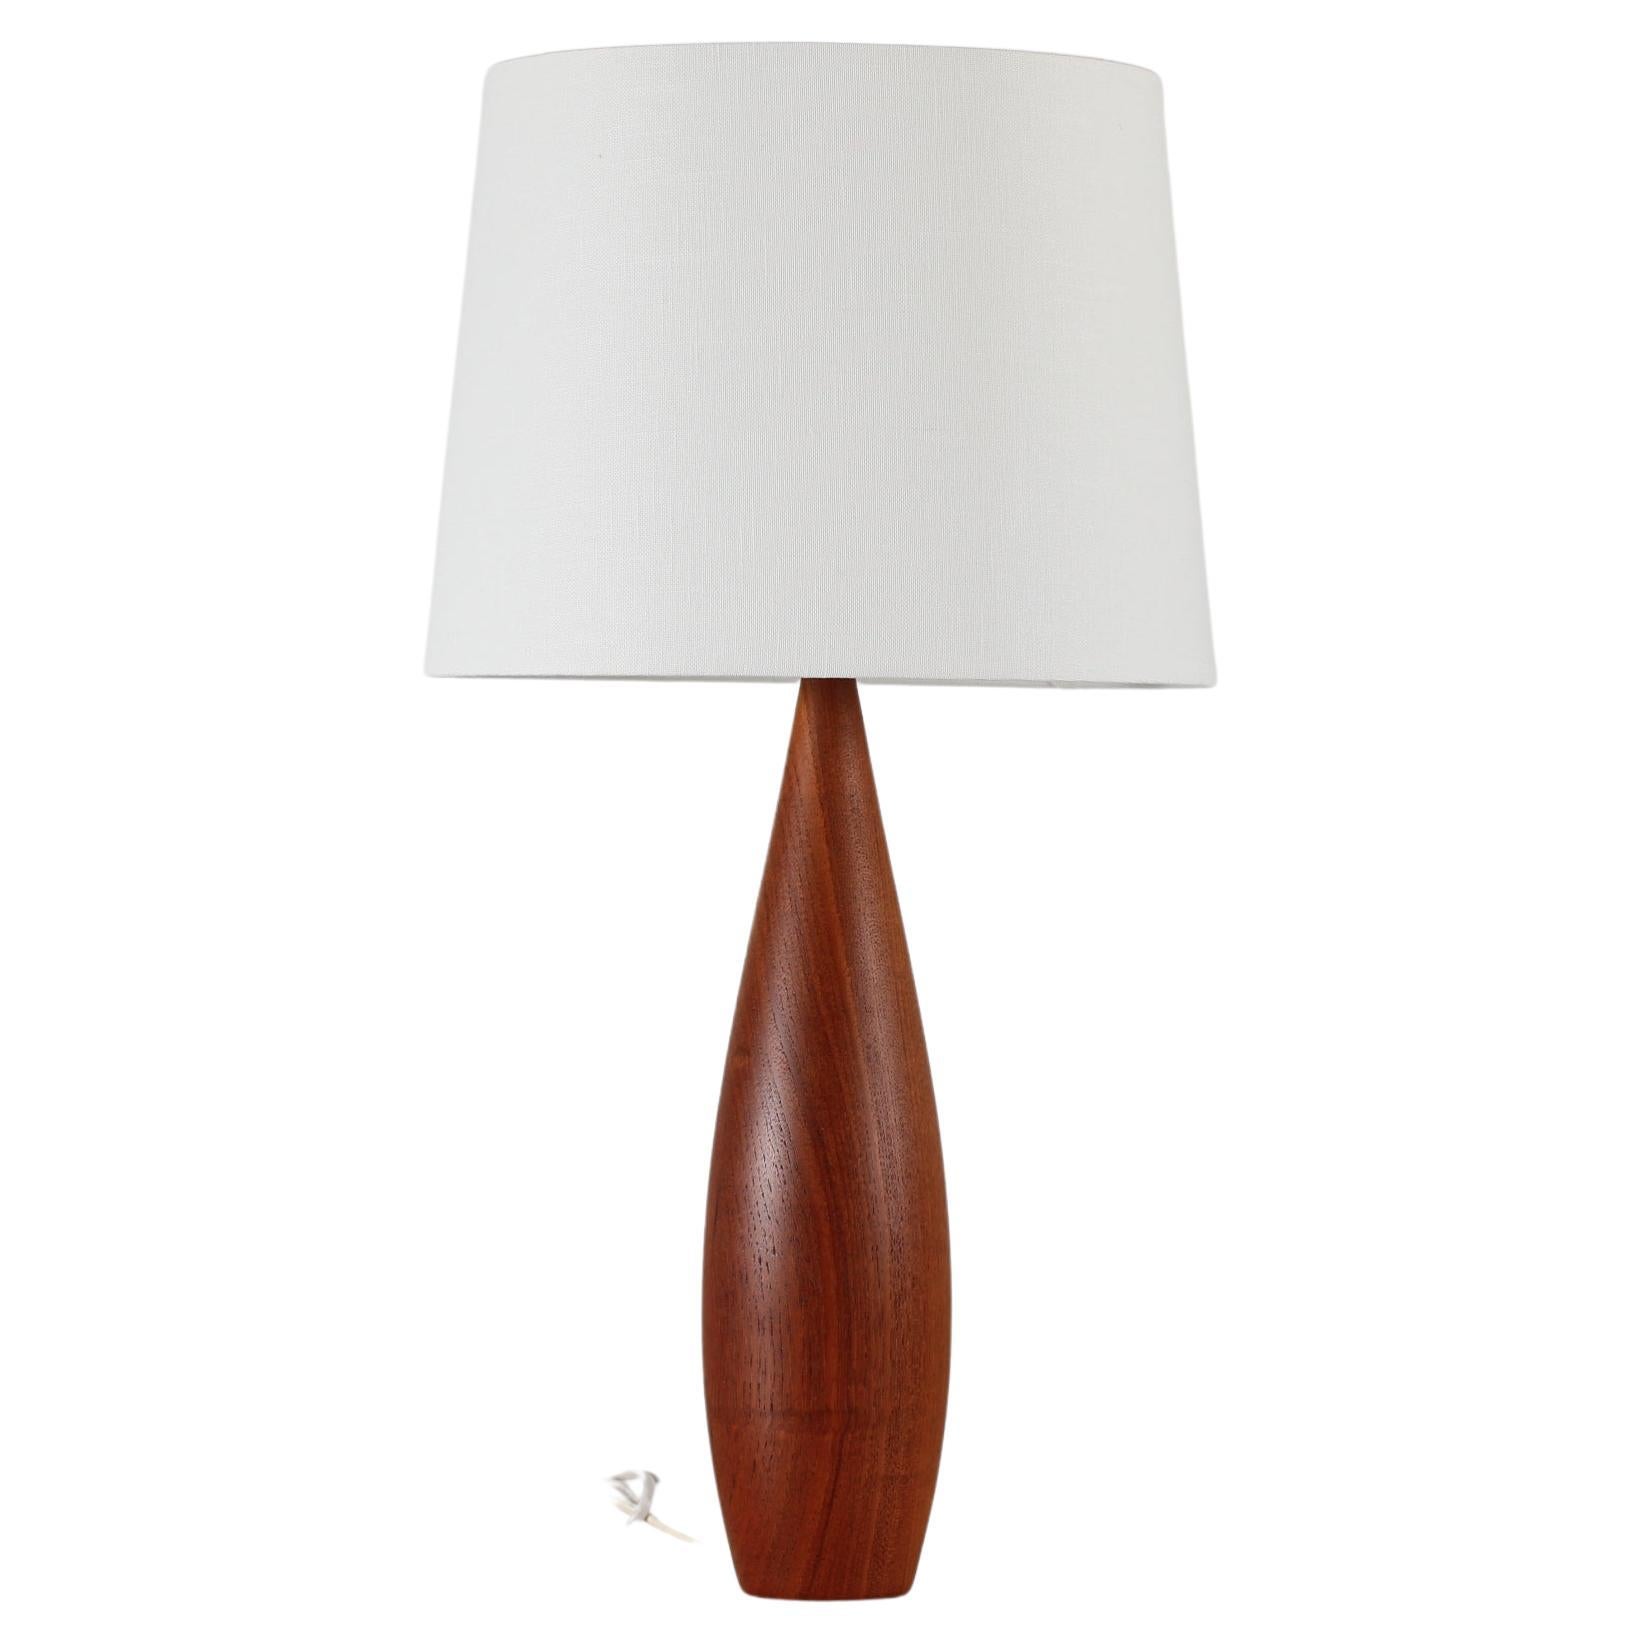 Vintage Tall Table Lamp of Hand-Turned Teak with New Shade, Scandinavian, 1960s For Sale